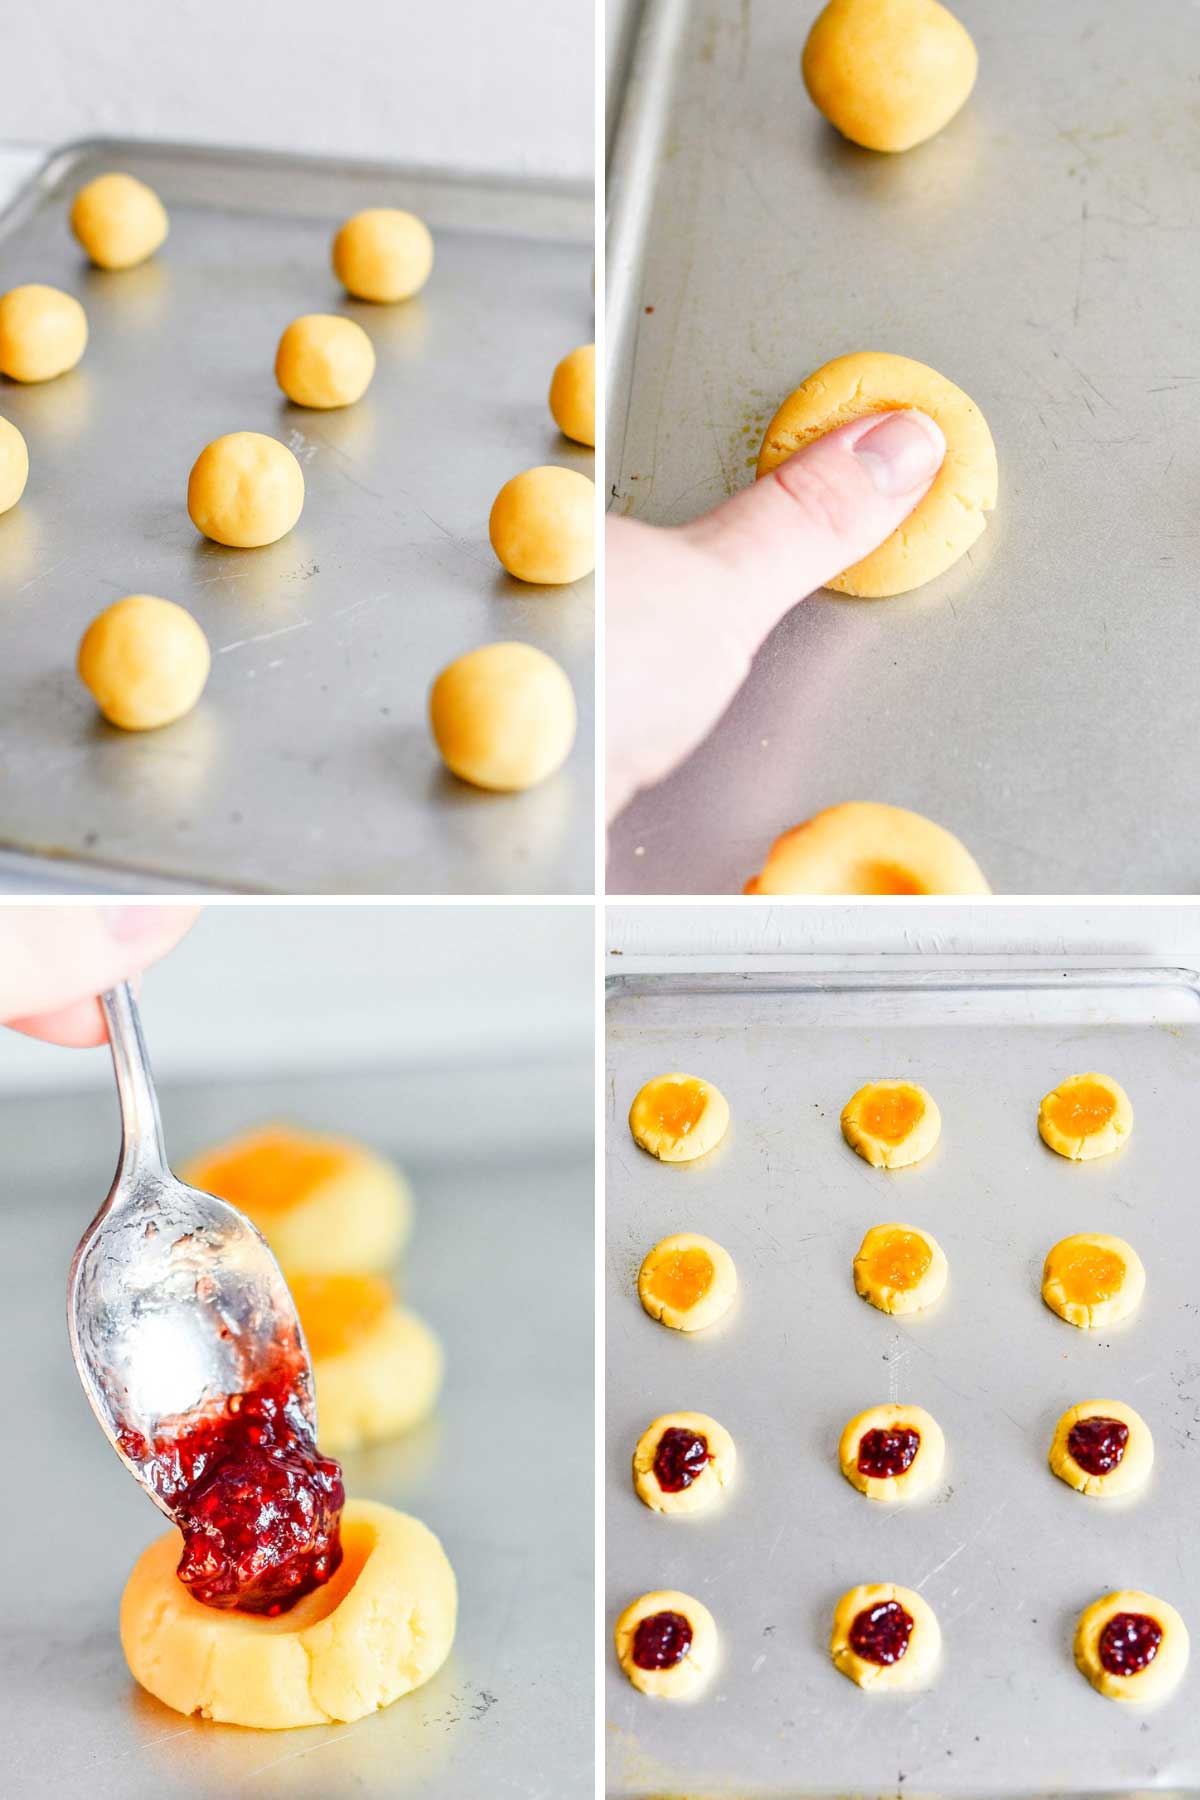 Rolling and filling the thumbprint cookies.